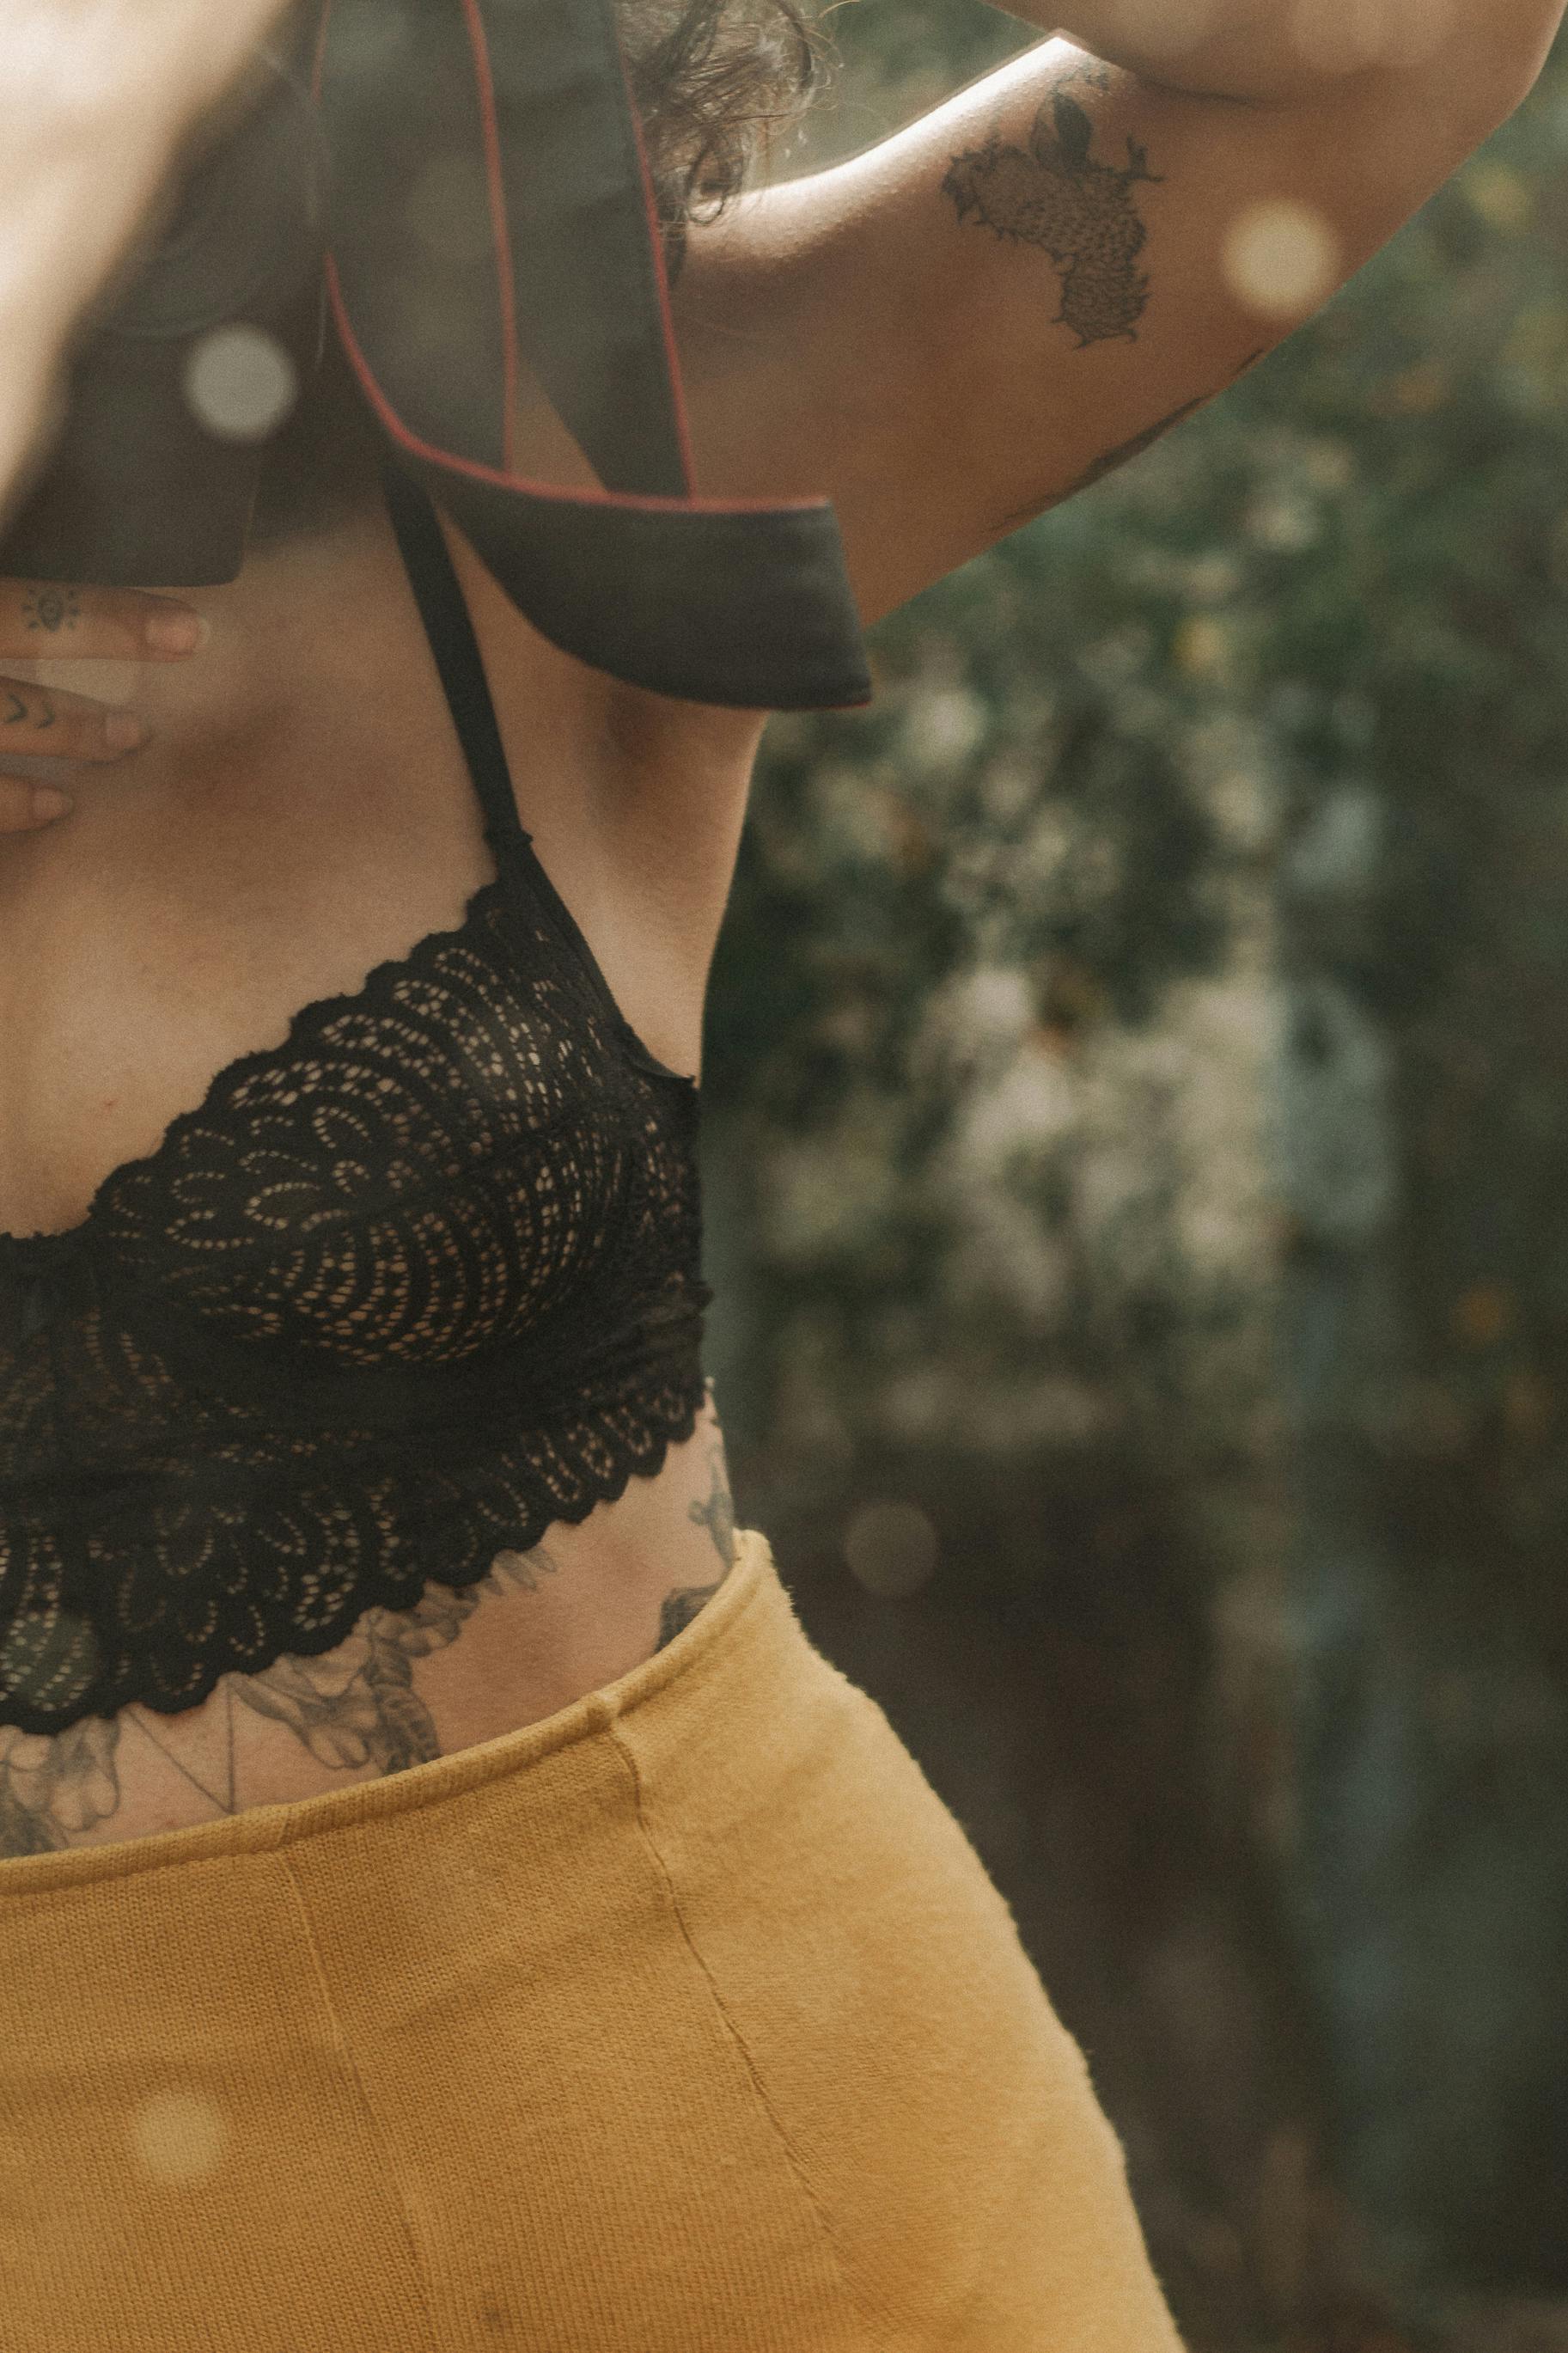 Midsection of a Young Shirtless Woman Wearing a Black Lace Bra · Free Stock  Photo